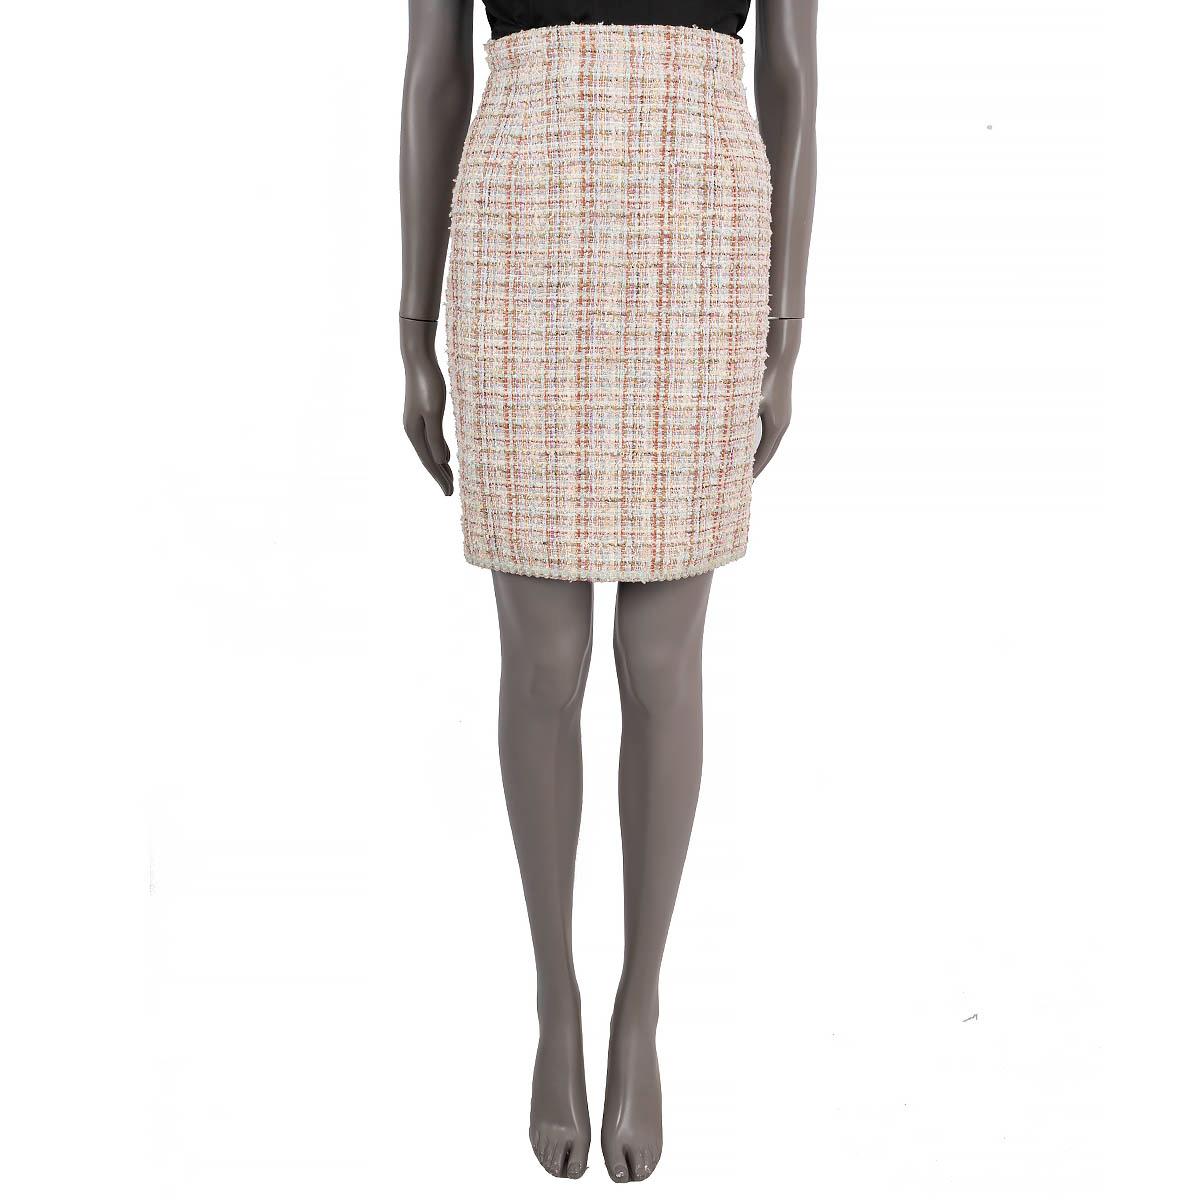 100% authentic Chanel classic tweed skirt in pastel blue, pink, beige and olive green cotton (55%), polyamide (27%), viscose (15%), metallized polyester (2%) and acrylic (1%). Features a button kick pleat with three pink enamelled camellia buttons.